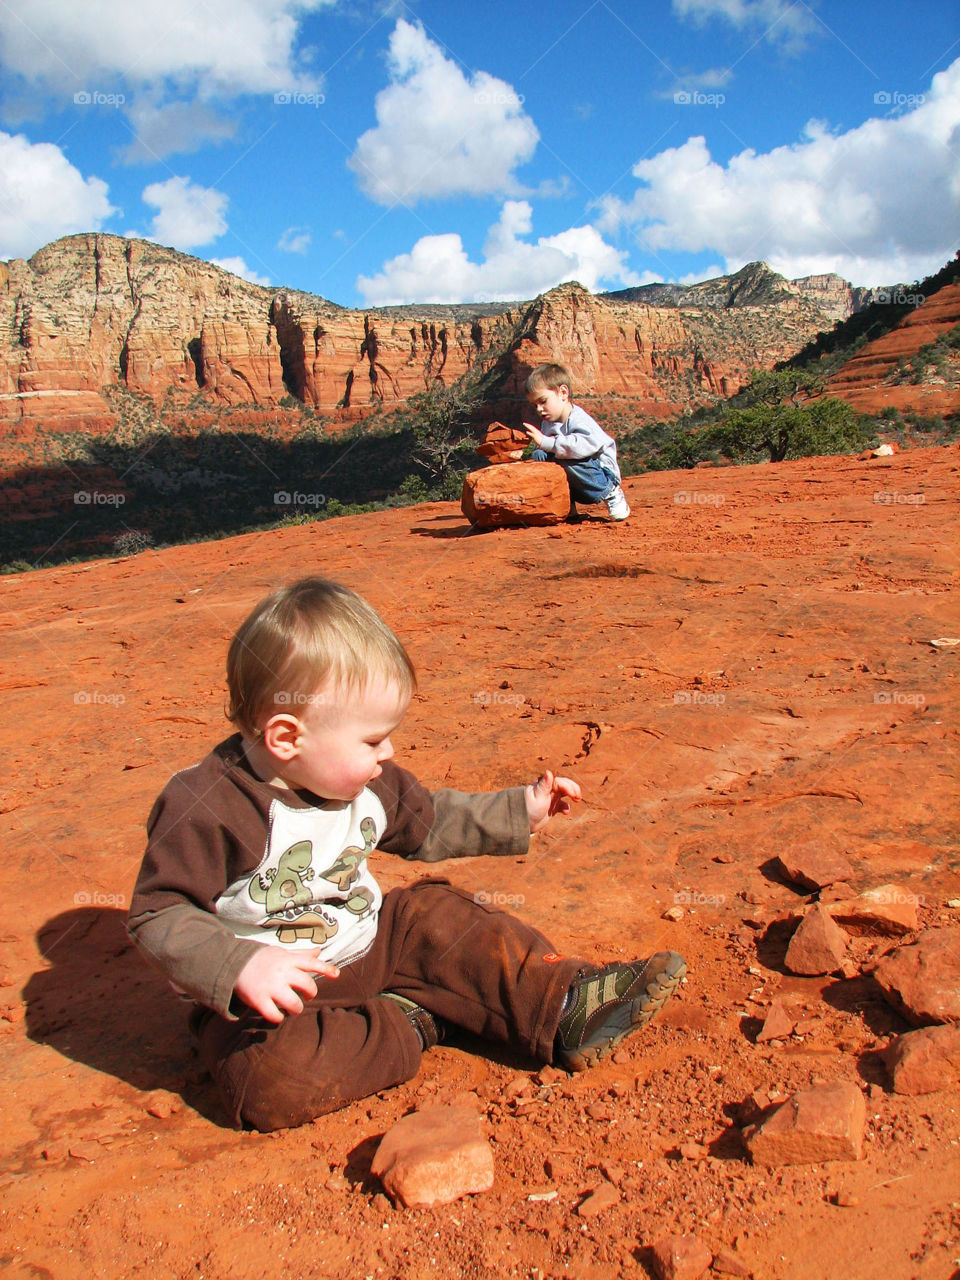 Boys Stacking Rocks in Sedona with Mountains in the Background.